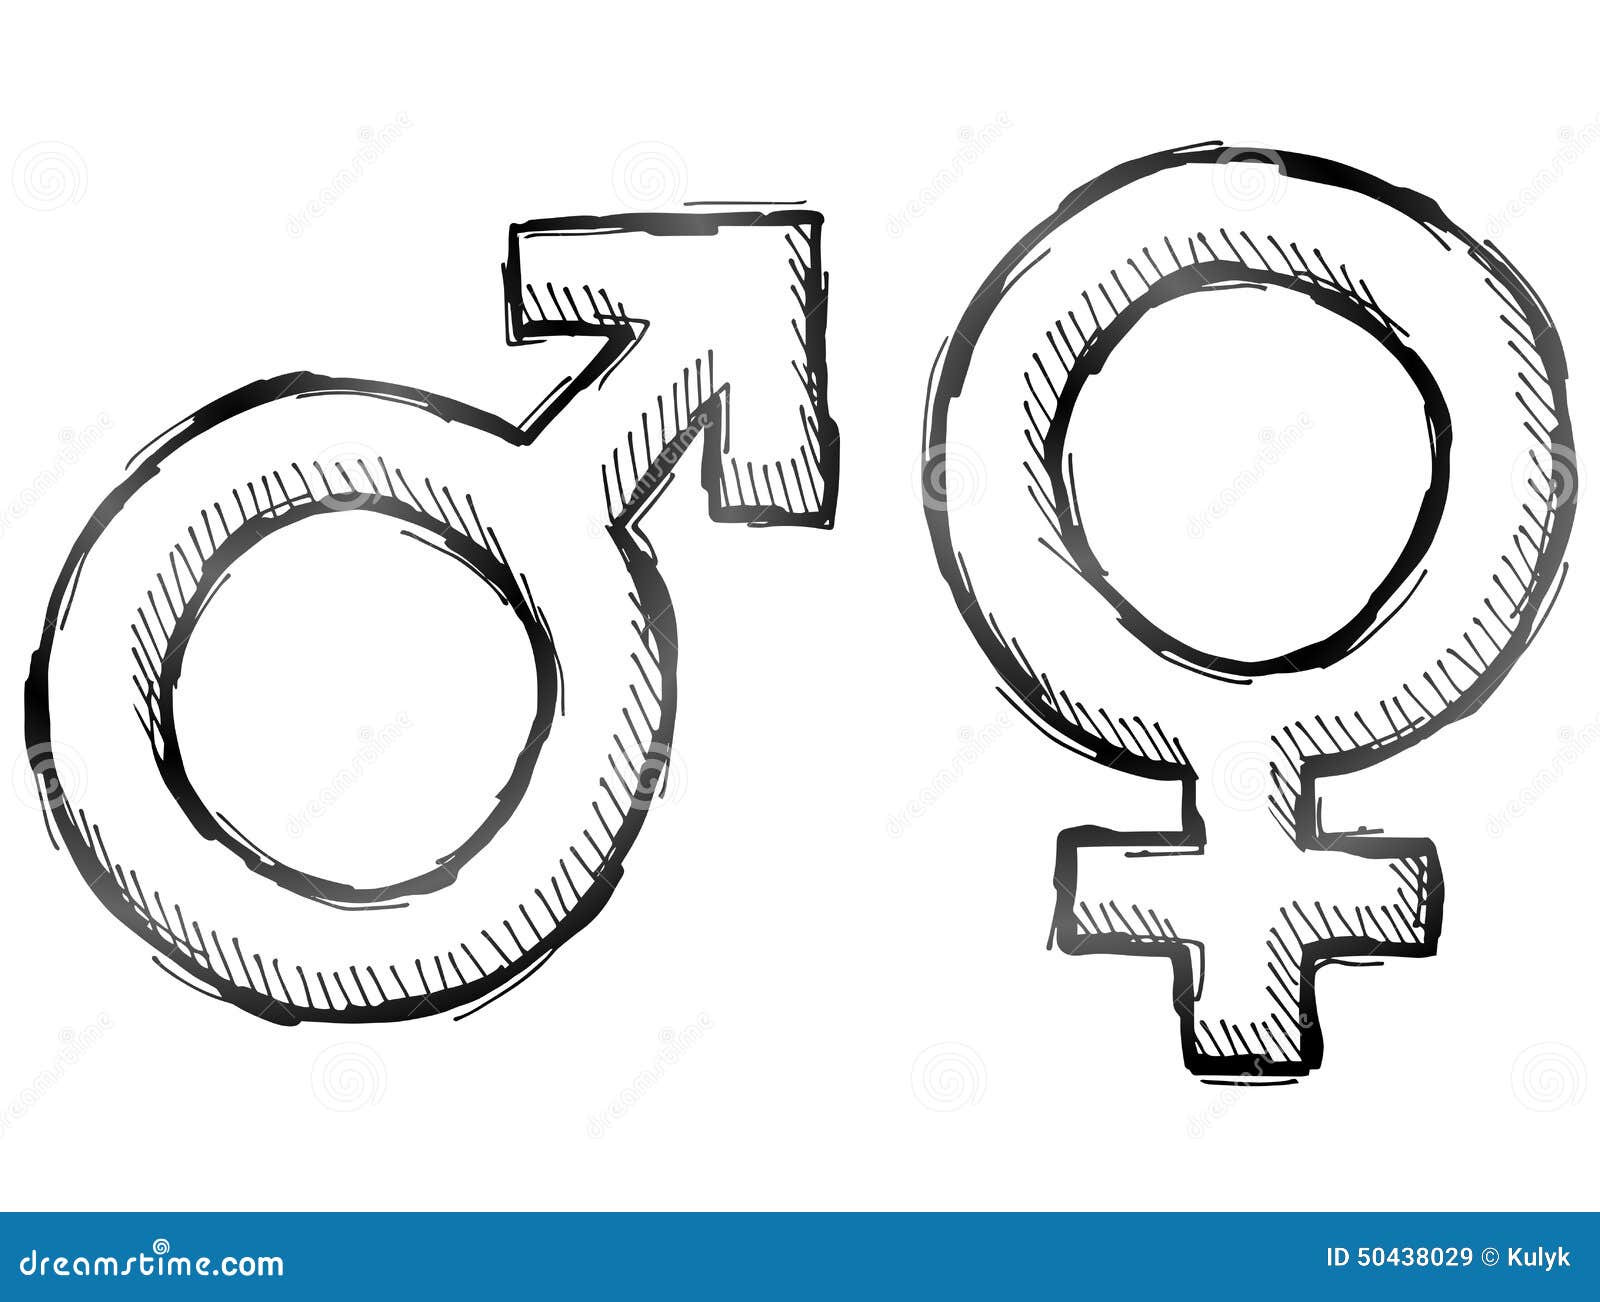 Pin by Nowrinshefa on Ideas | Third gender, Gender, Dignity